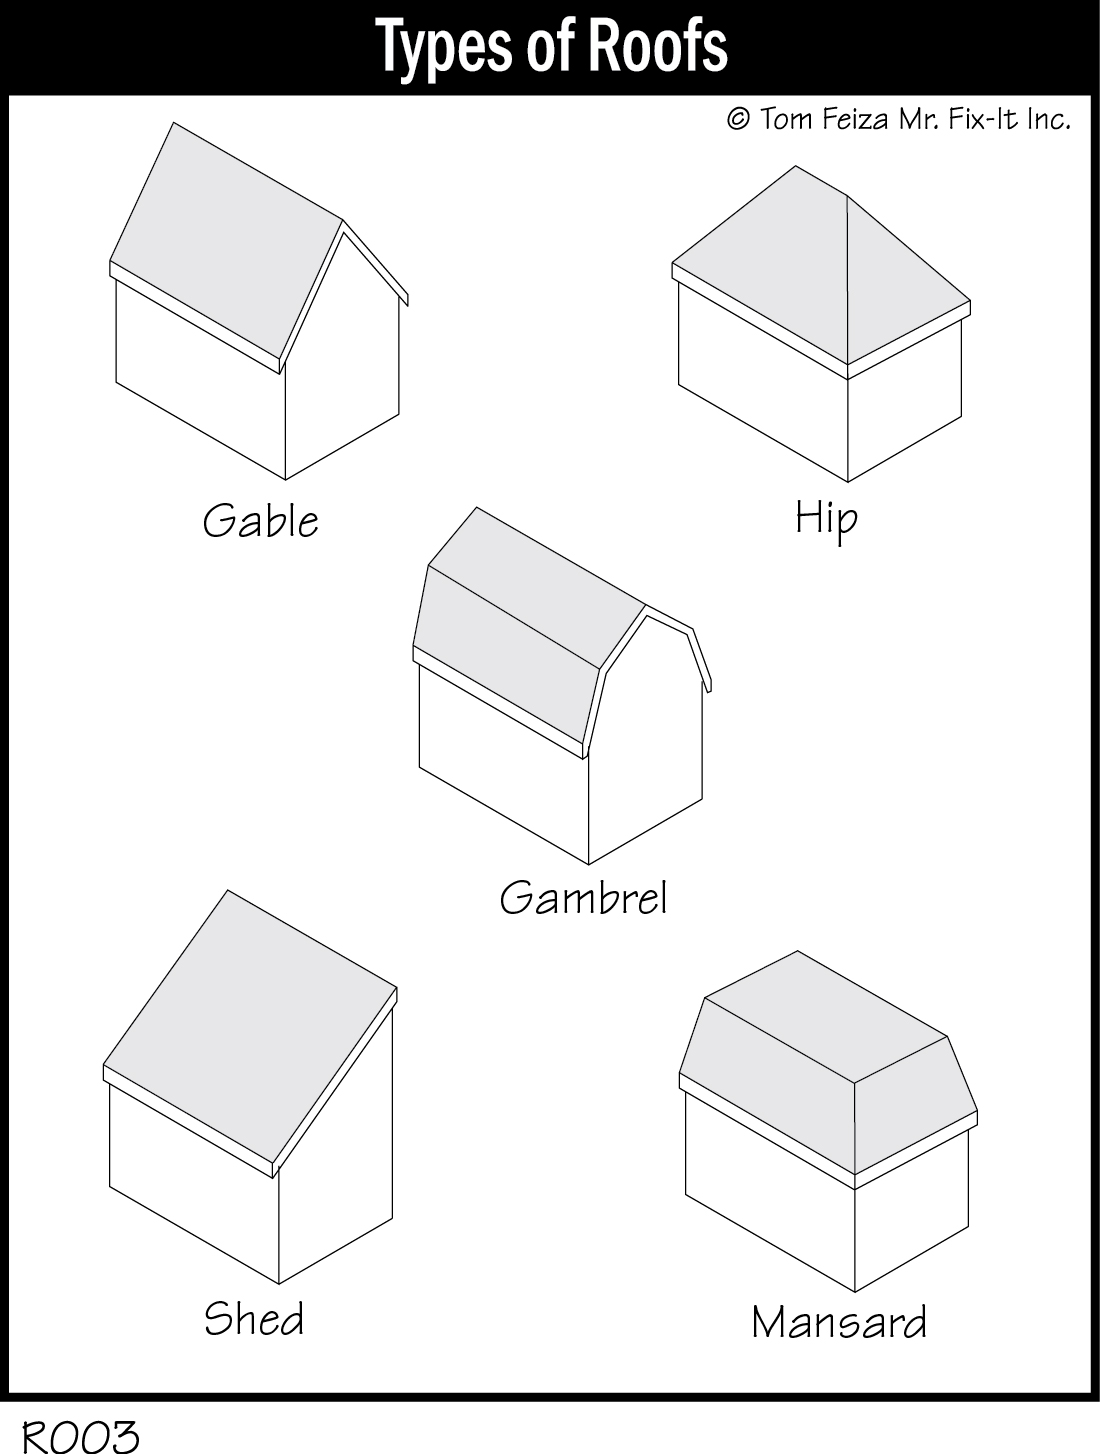 R003 - Types of Roofs